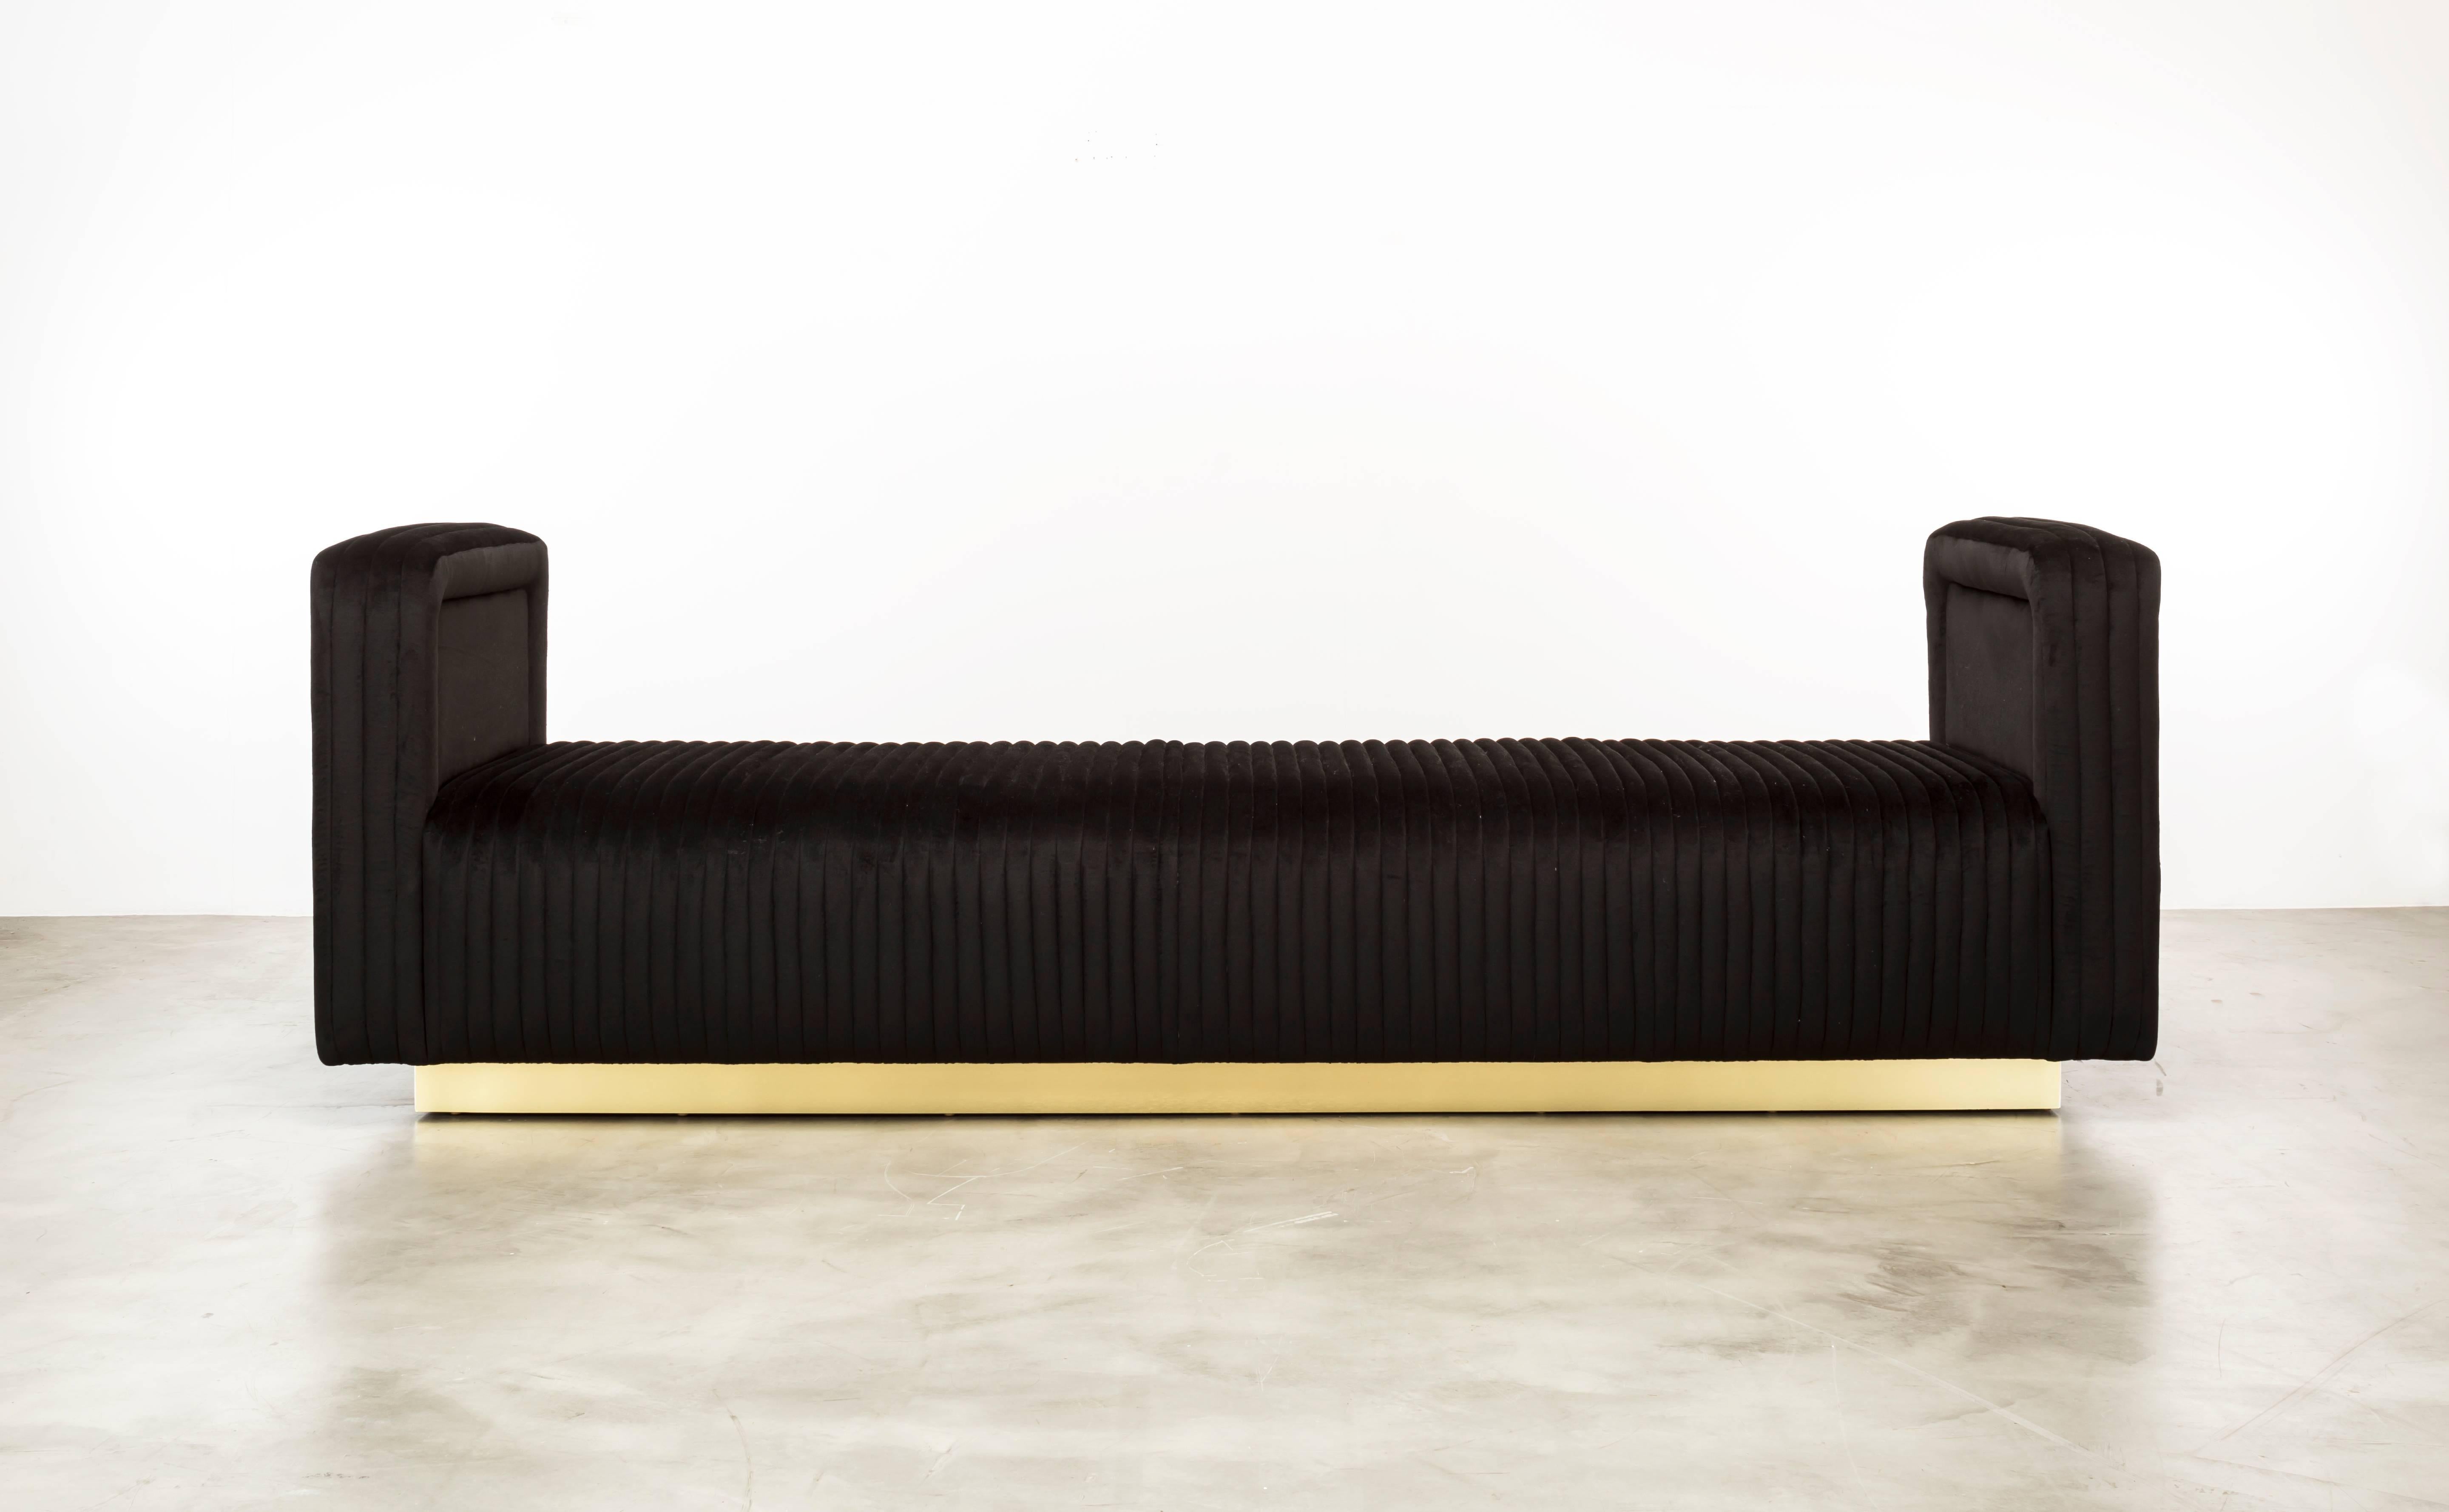 The Channel Daybed inspired by vintage car interiors features channeled waterfall leather on a plinth base.   Fully custom and made to order in California.  As shown in Glam Velvet $11,790.  Starting at $10,950.